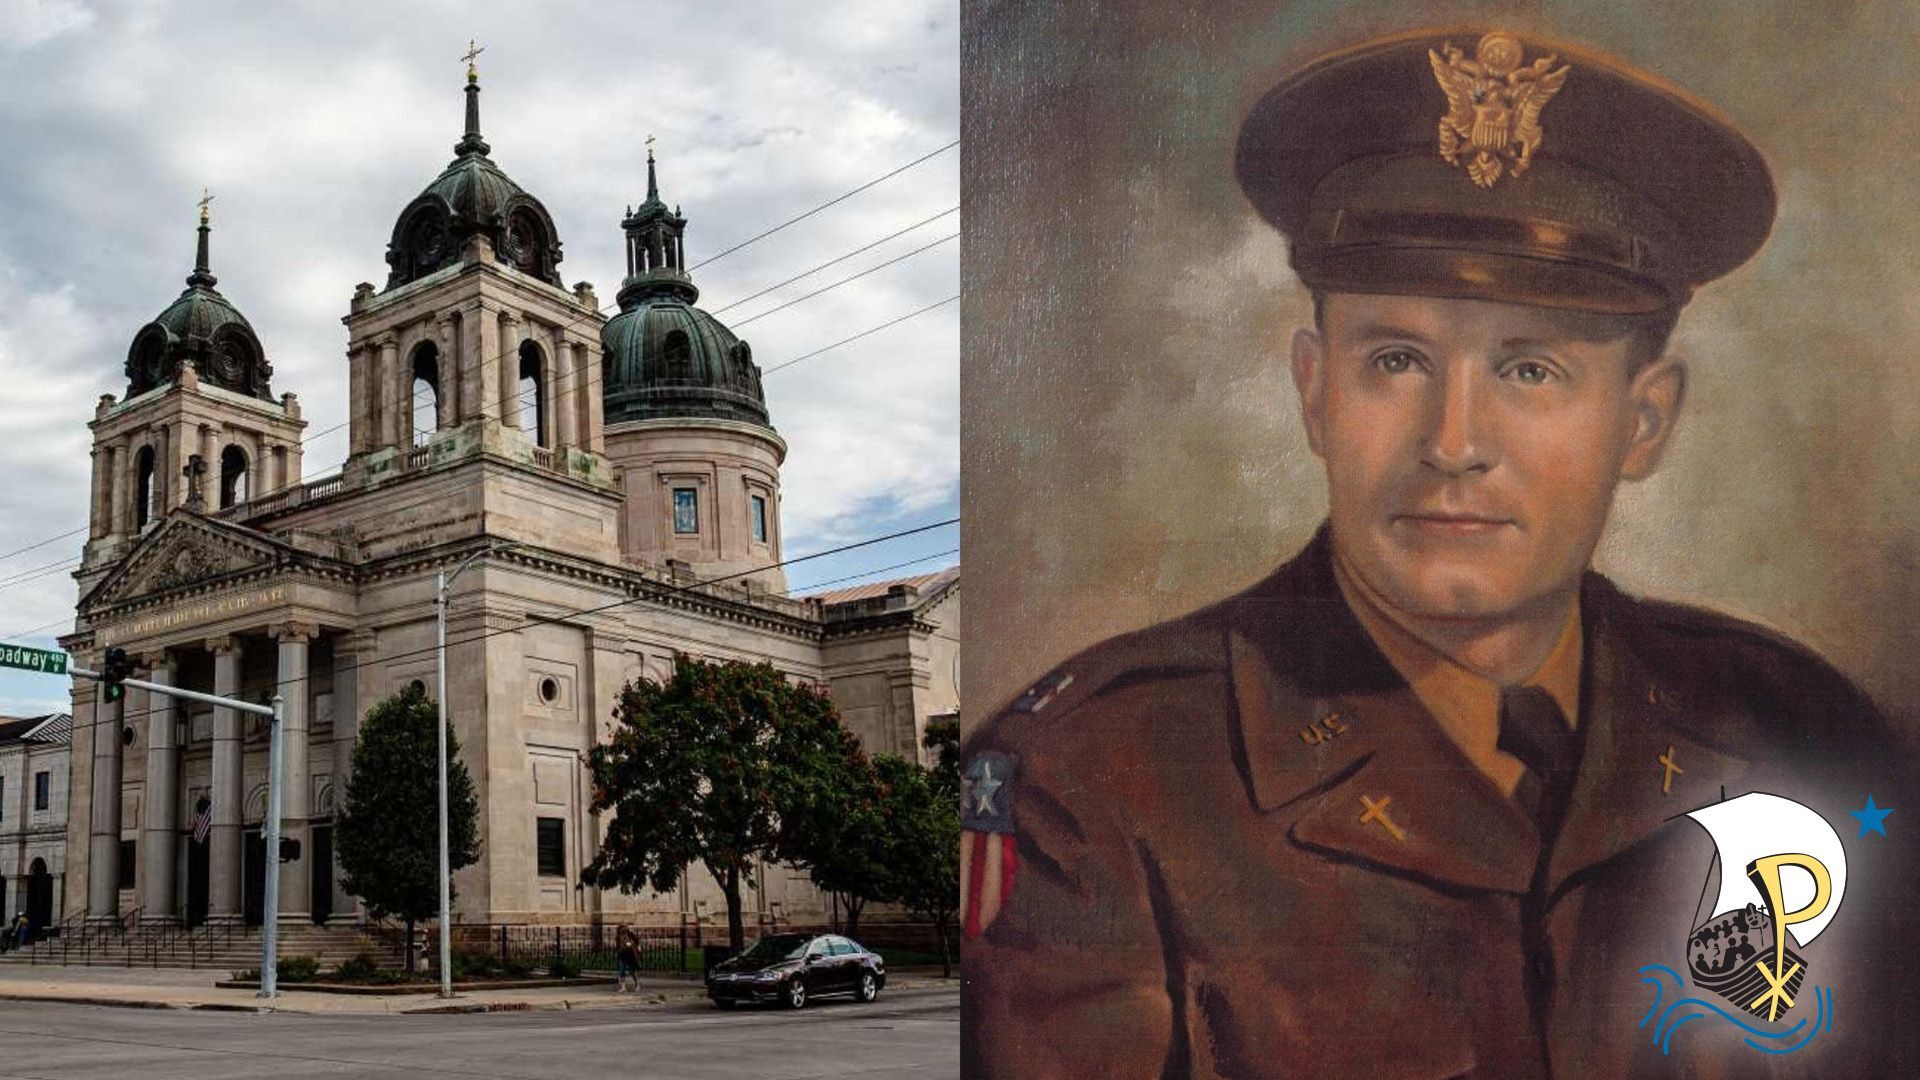 Cathedral of the Immaculate Conception & Servant of God Fr. Emil Kapaun – Wichita, KS